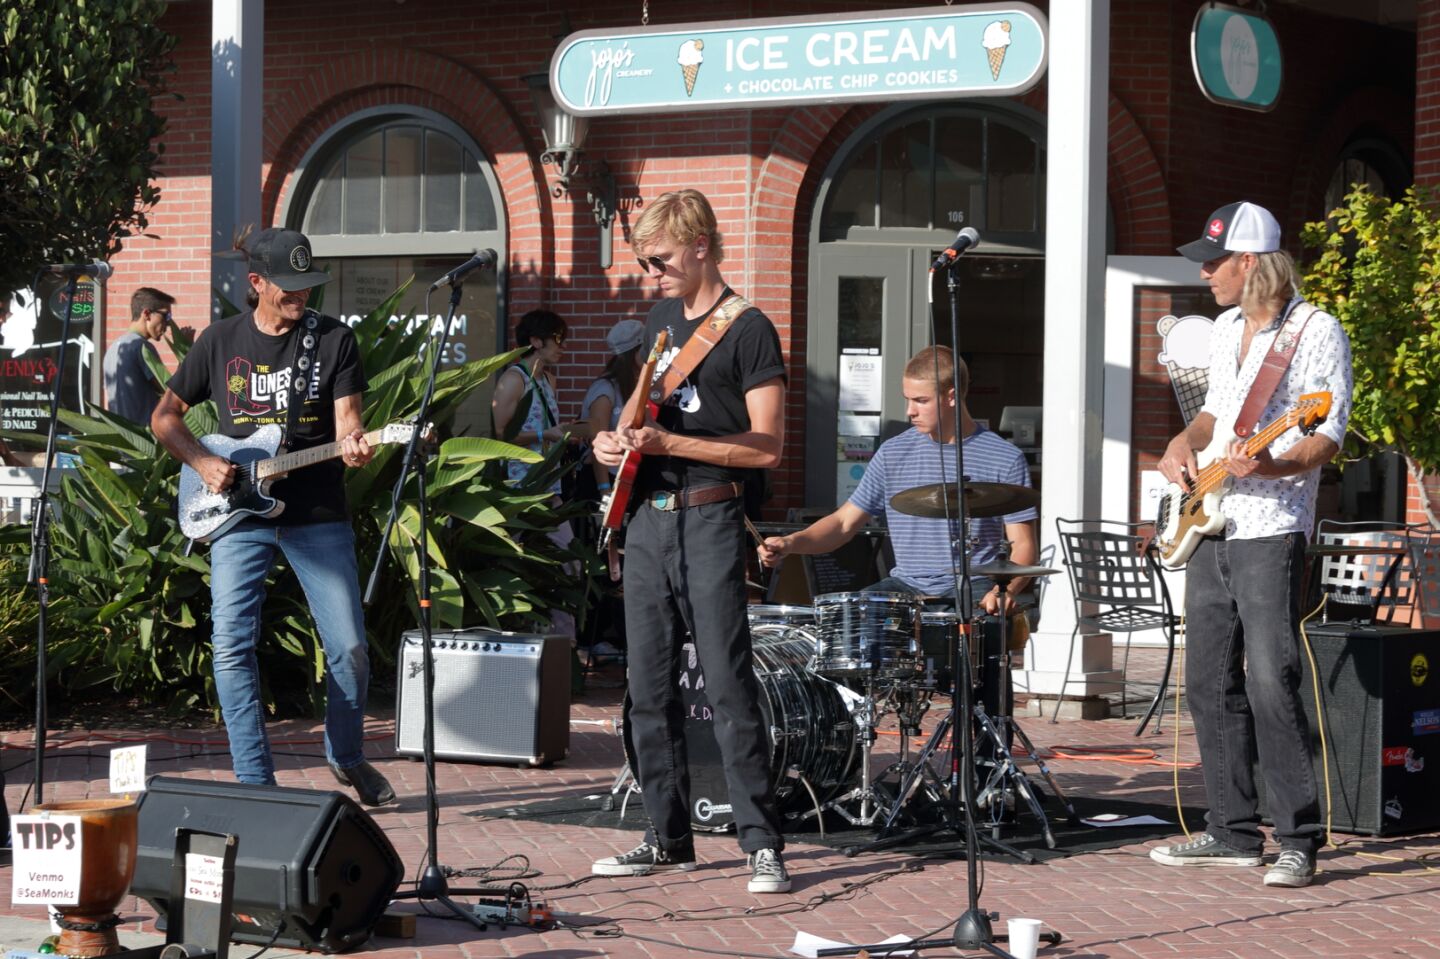 The Sea Monks performed at the Lumberyard Shopping Center